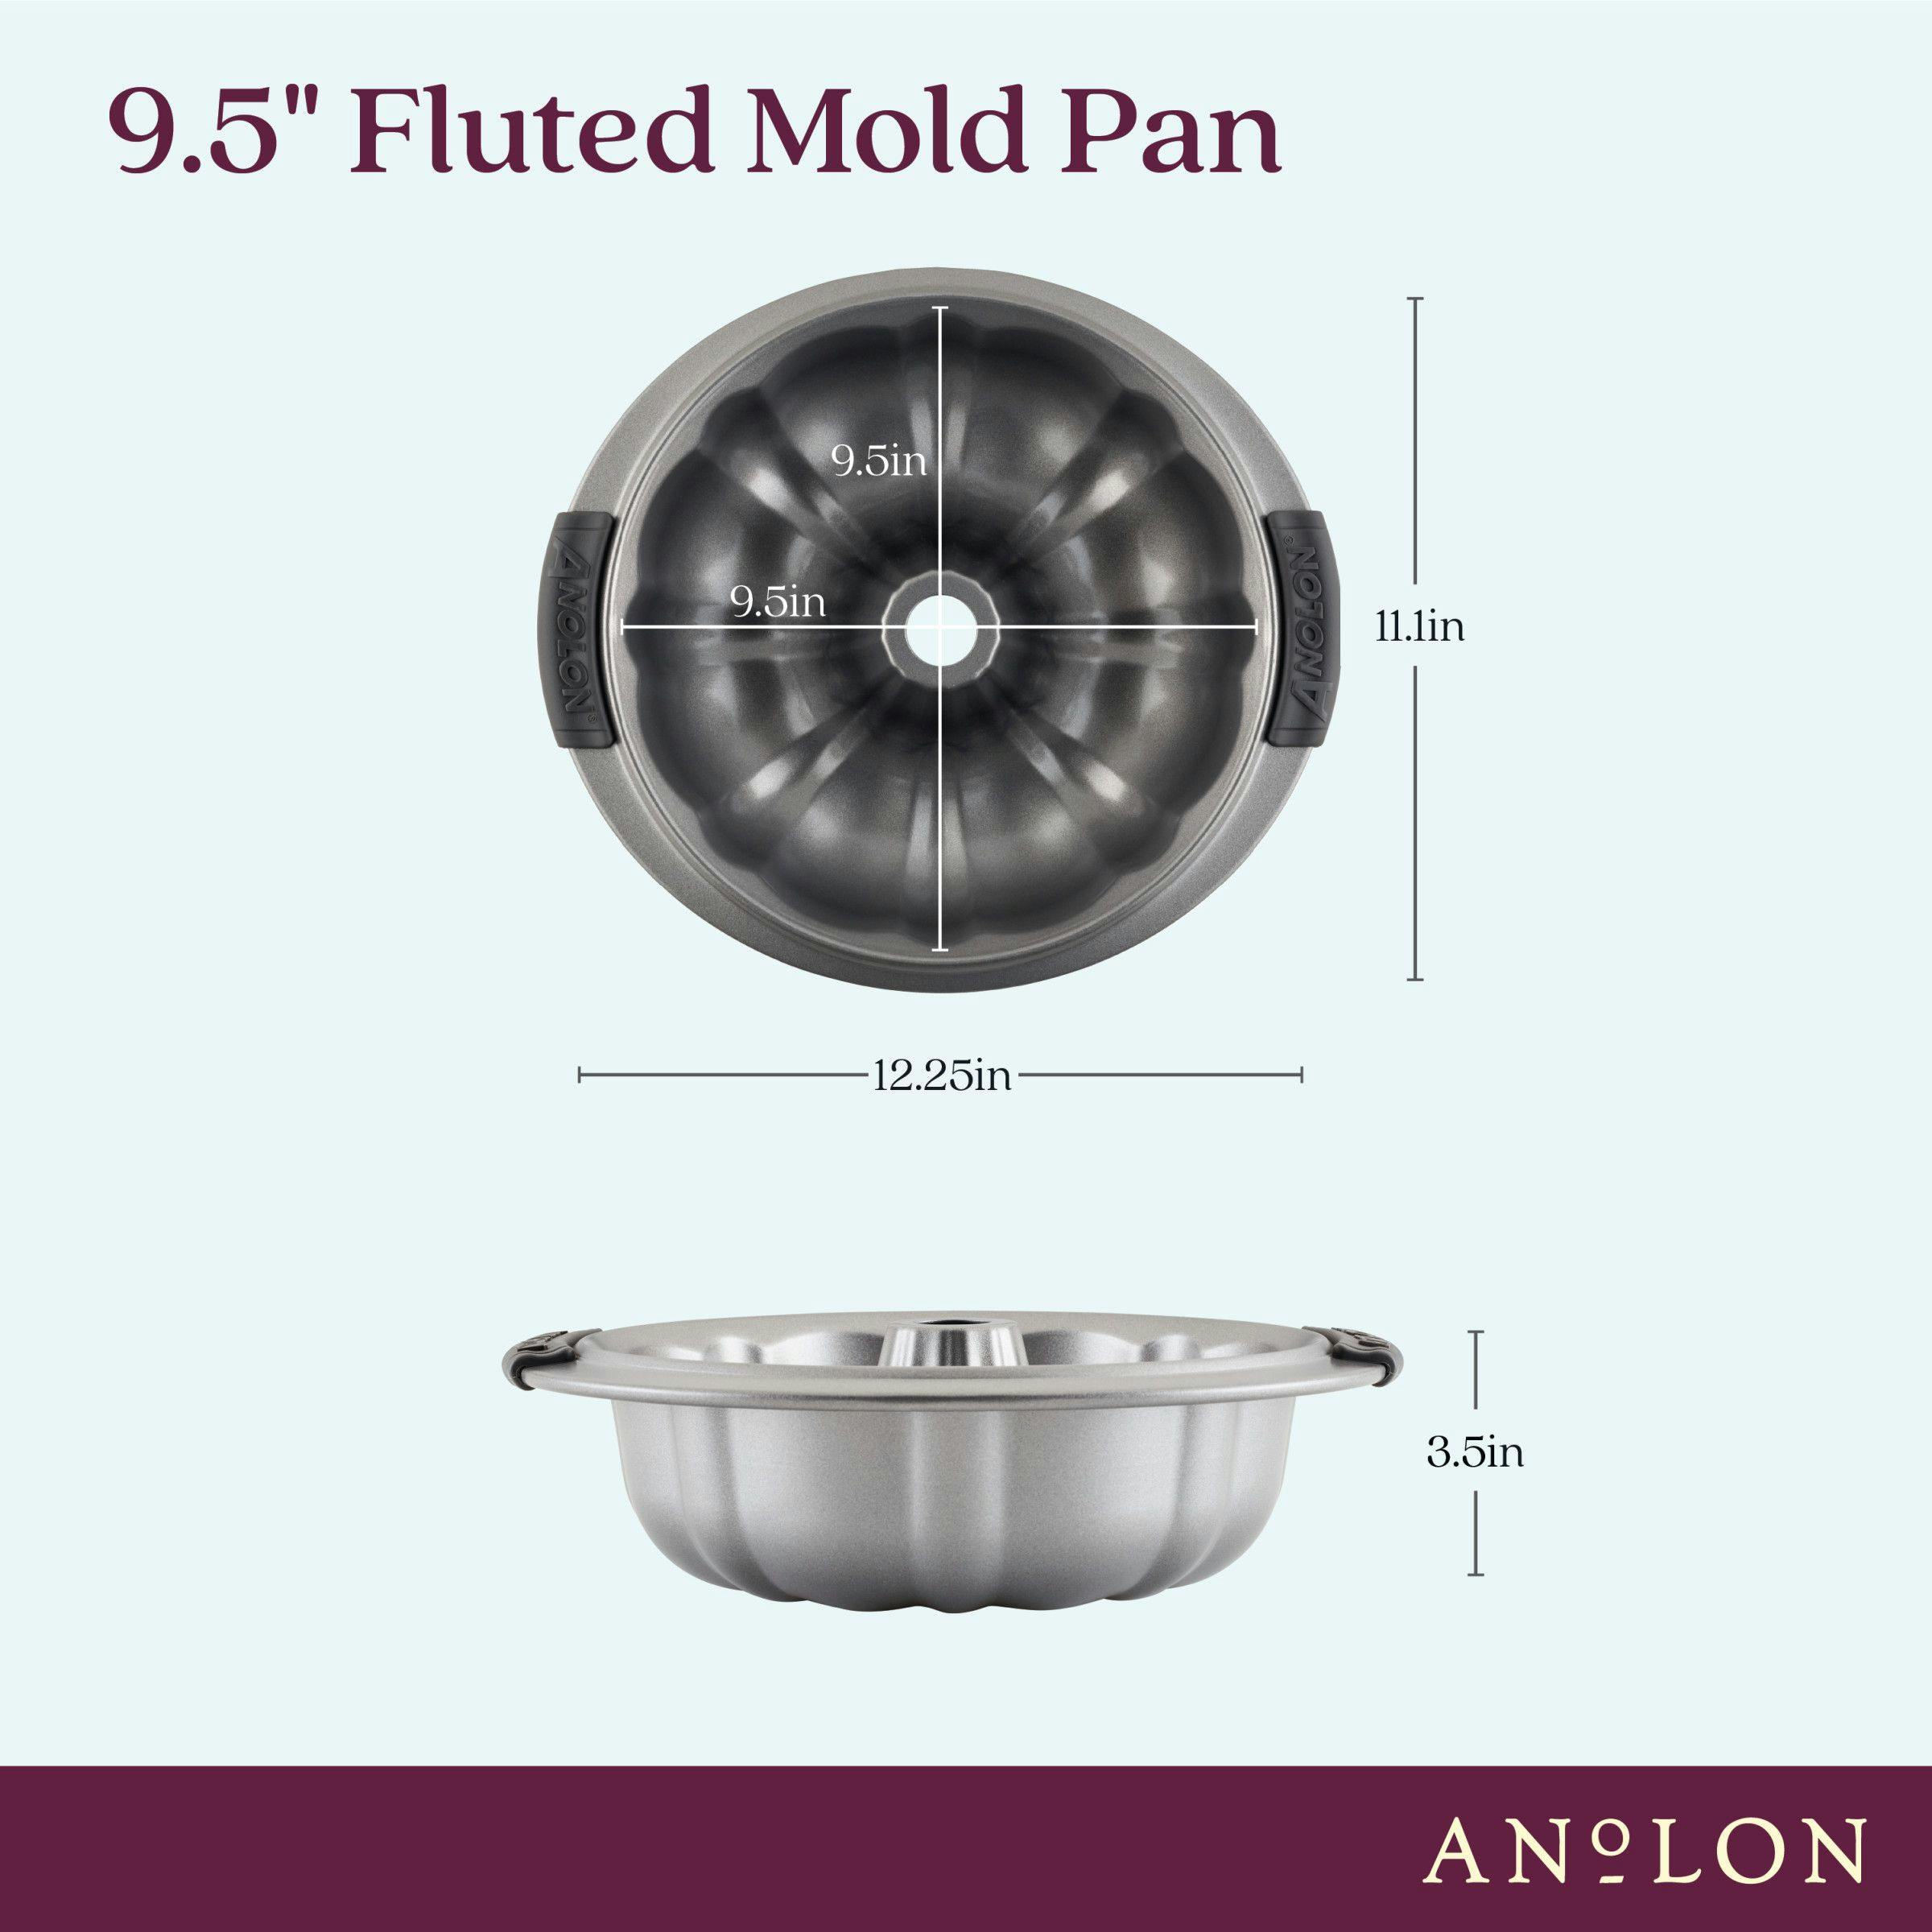 Anolon Advanced Bakeware Nonstick Fluted Mold Pan, 9.5-Inch, Gray